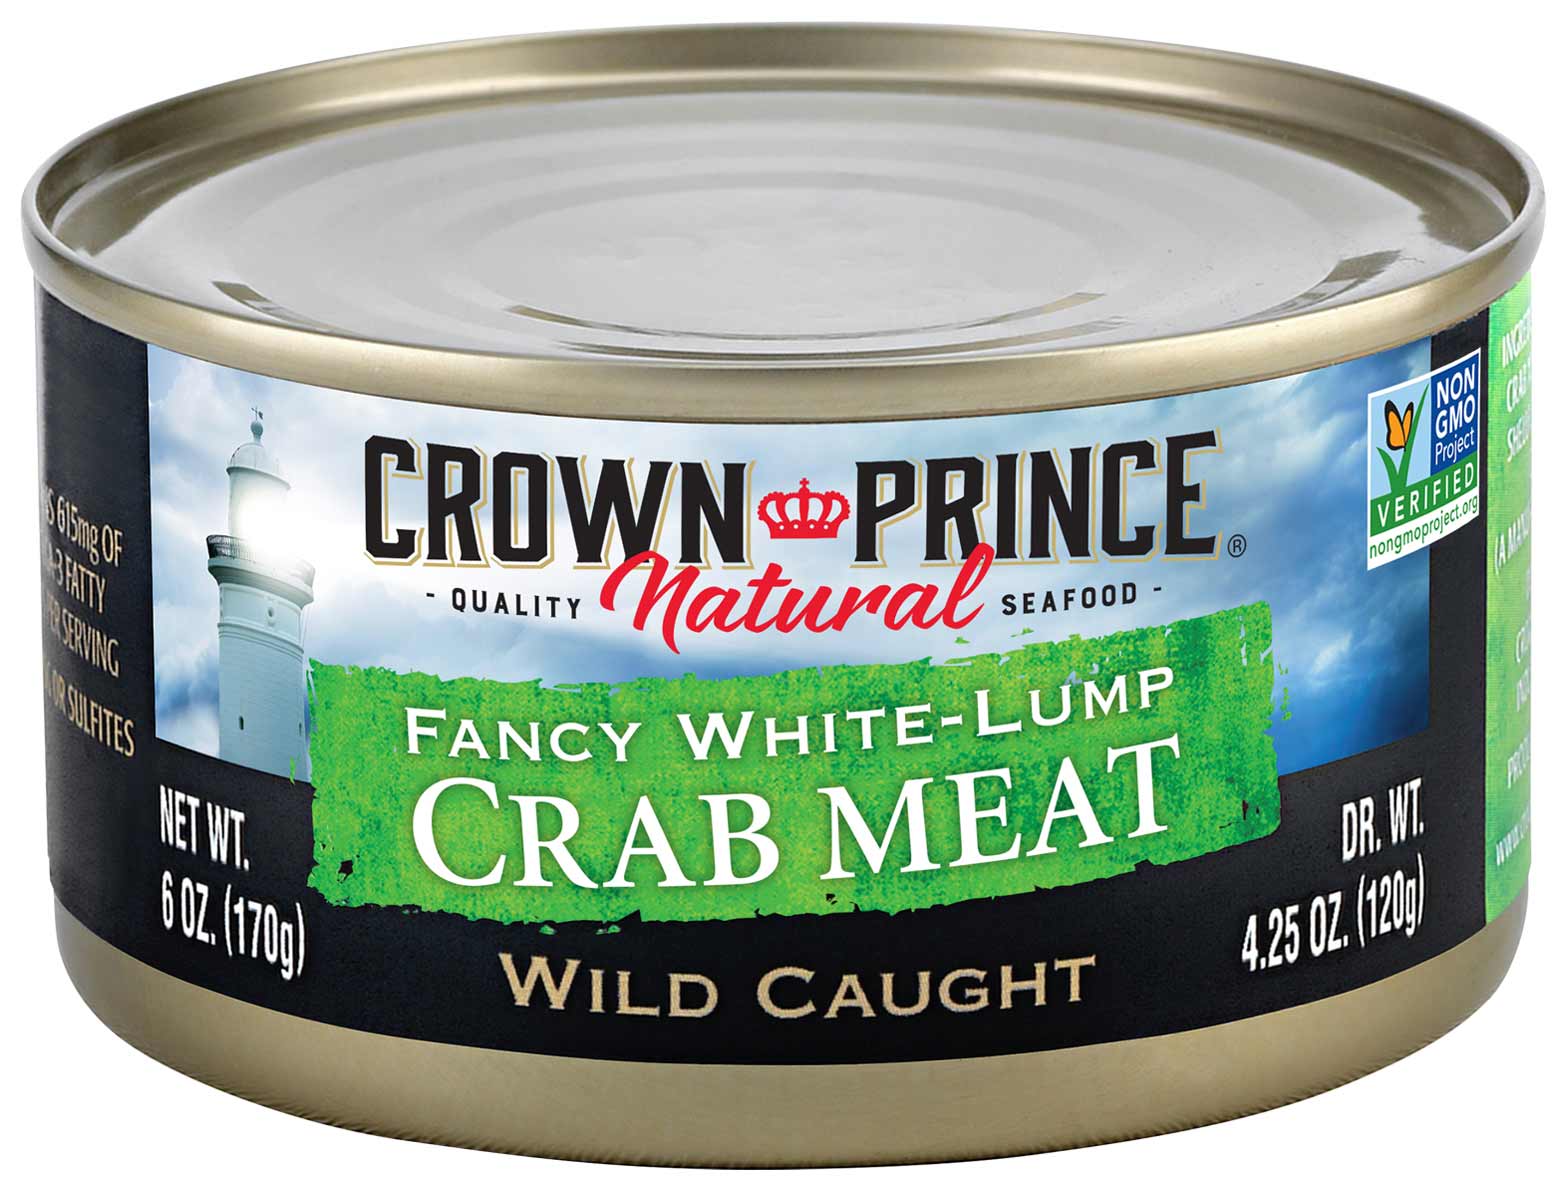 Crown Prince Natural Fancy White-Lump Crab Meat